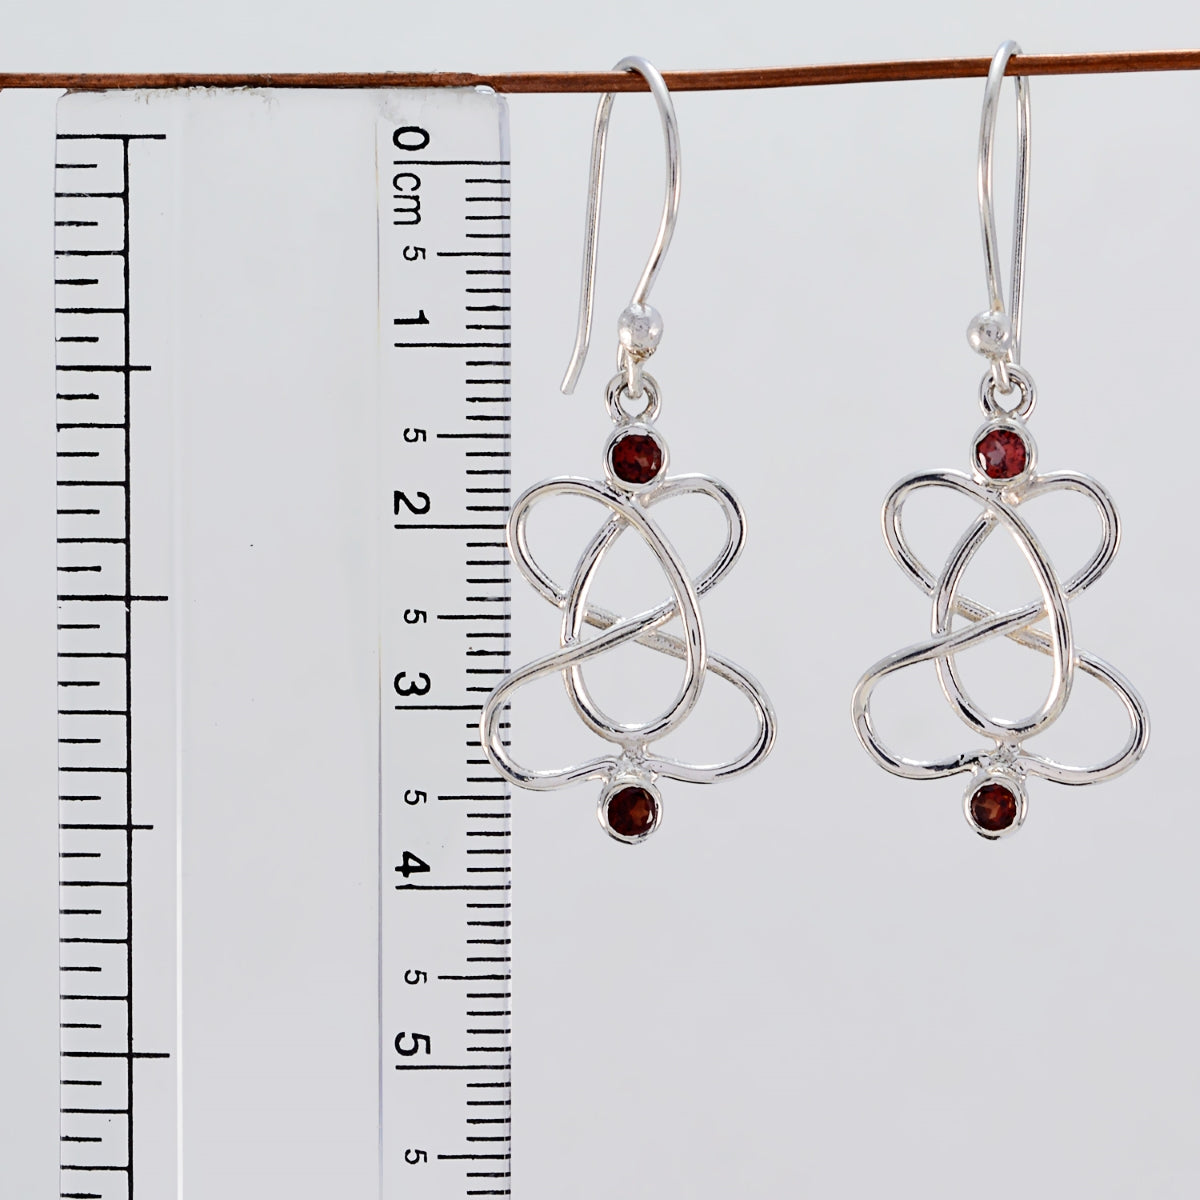 Riyo Natural Gemstone round Faceted Red Garnet Silver Earring gift for mother's day